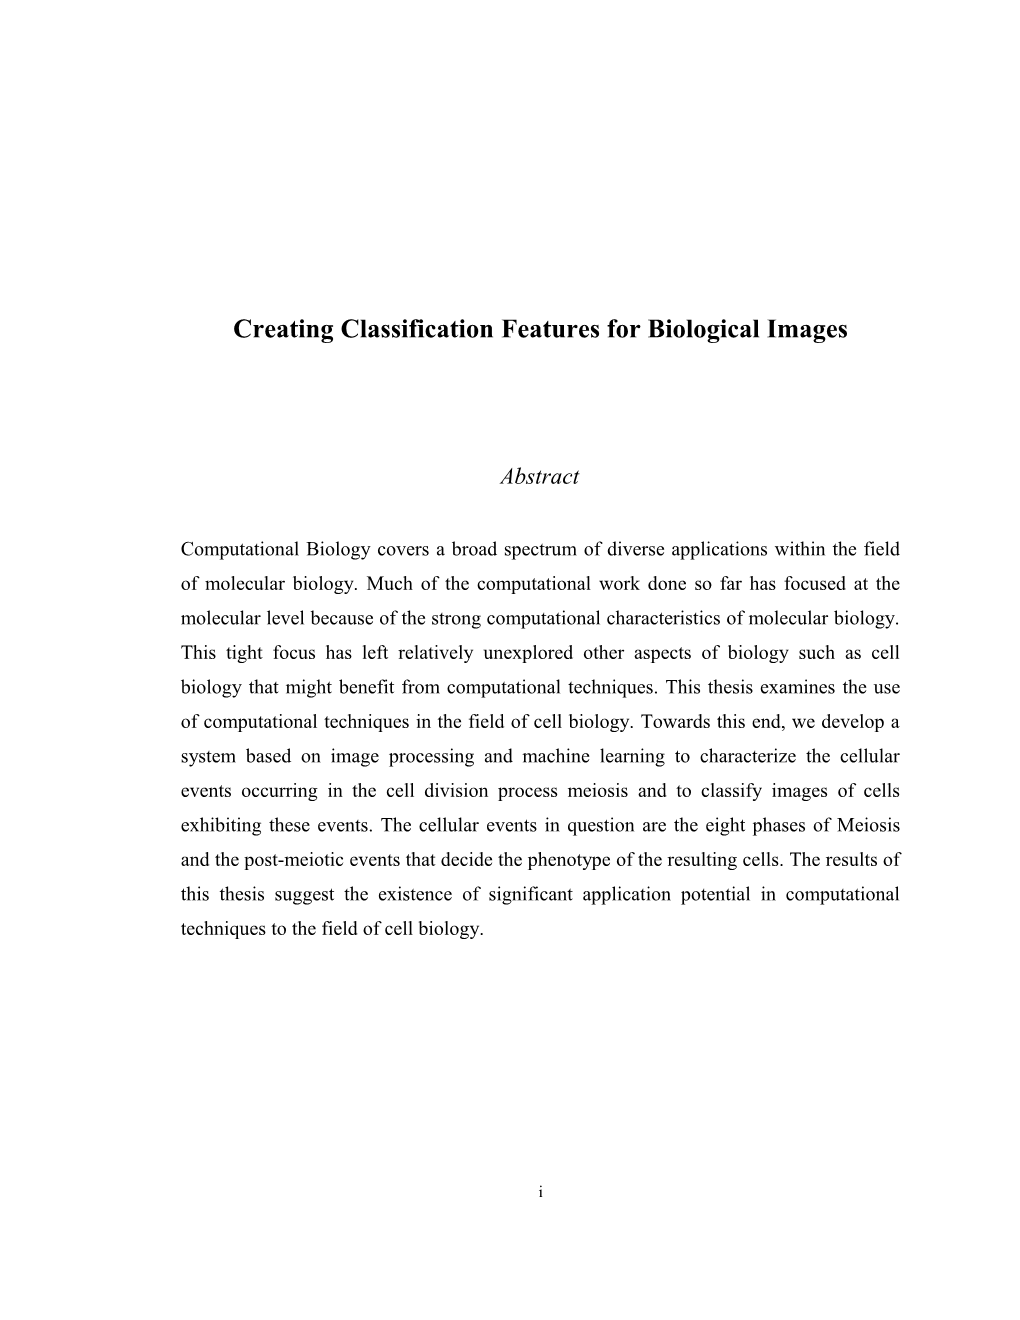 Creating Classification Features for Biological Images